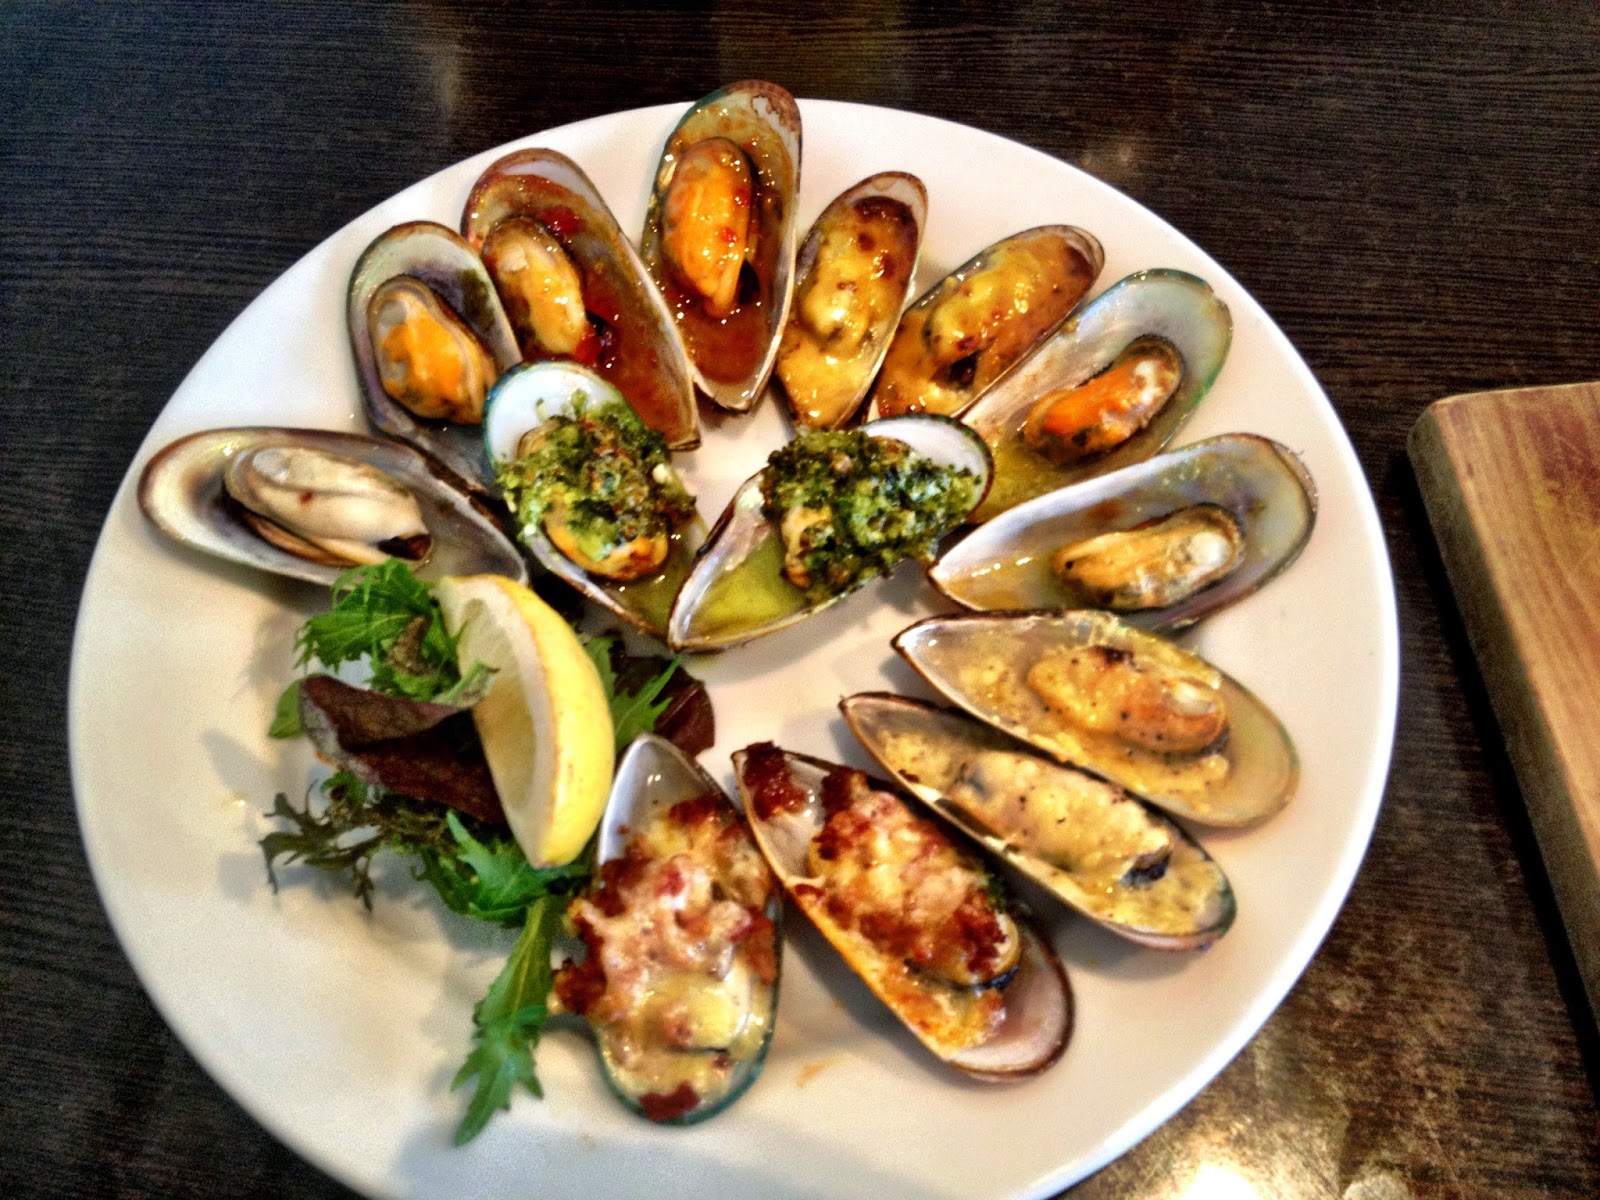 Havelock green shell mussels - New Zealand